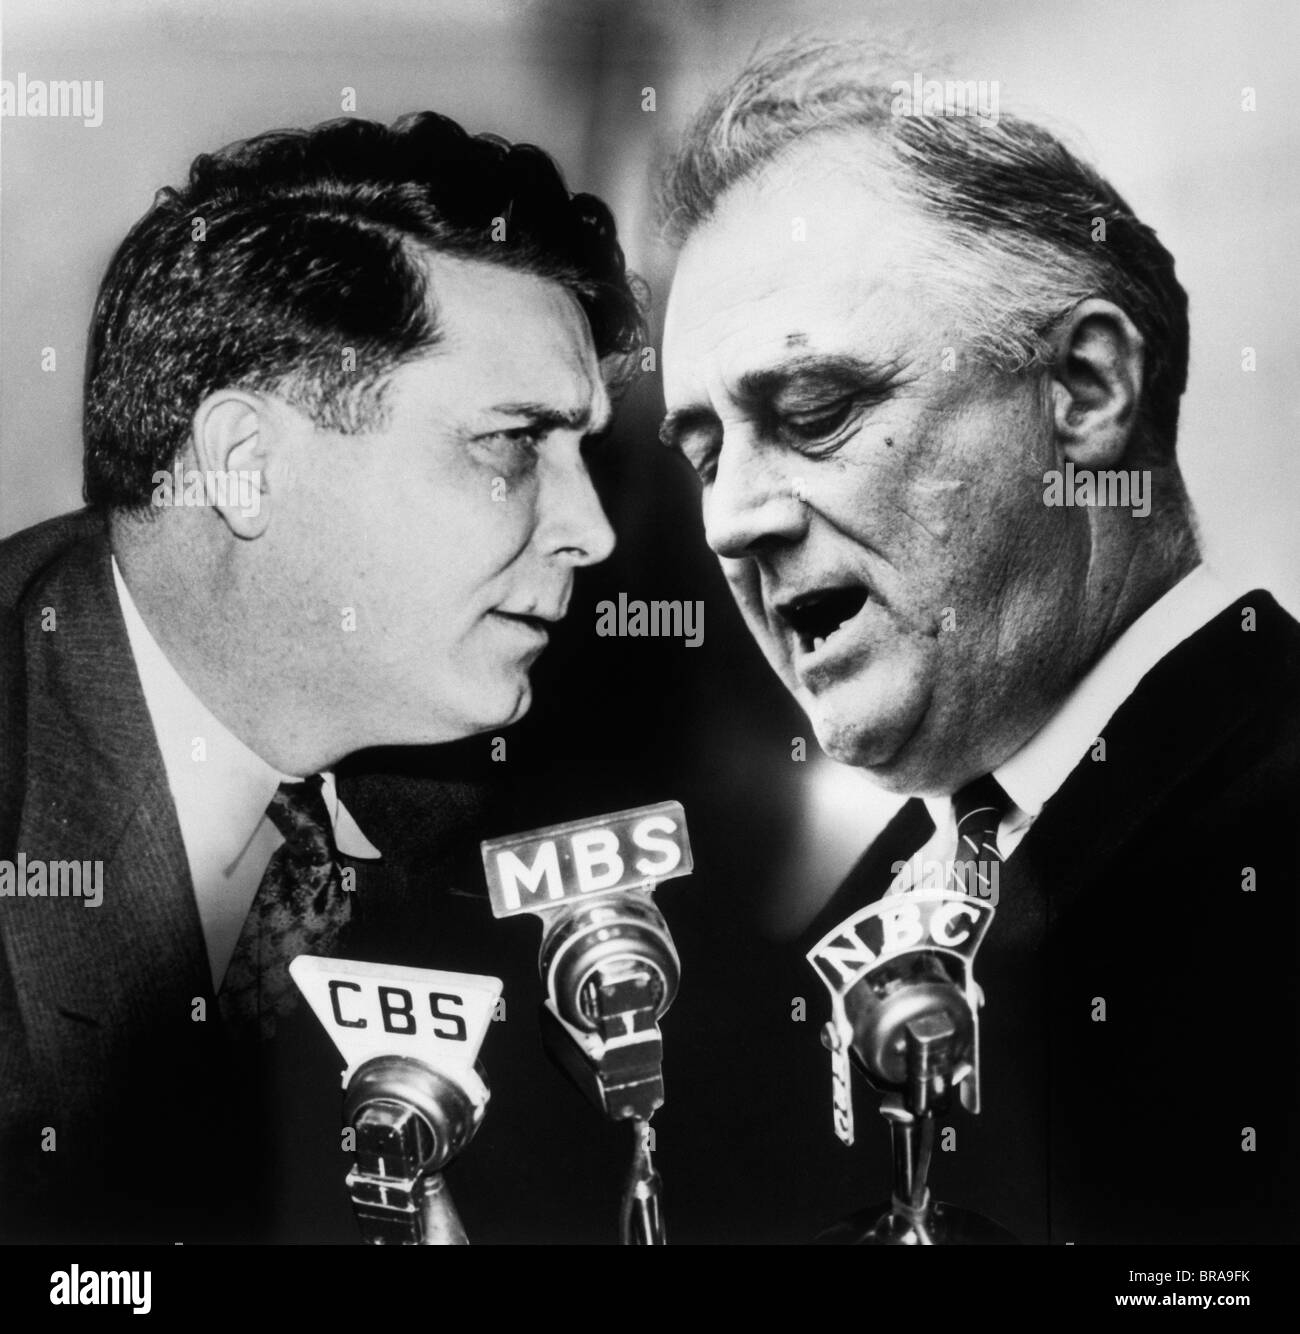 1940s WENDELL WILKIE AND FRANKLIN DELANO ROOSEVELT COMPOSITE WITH MICROPHONES Stock Photo